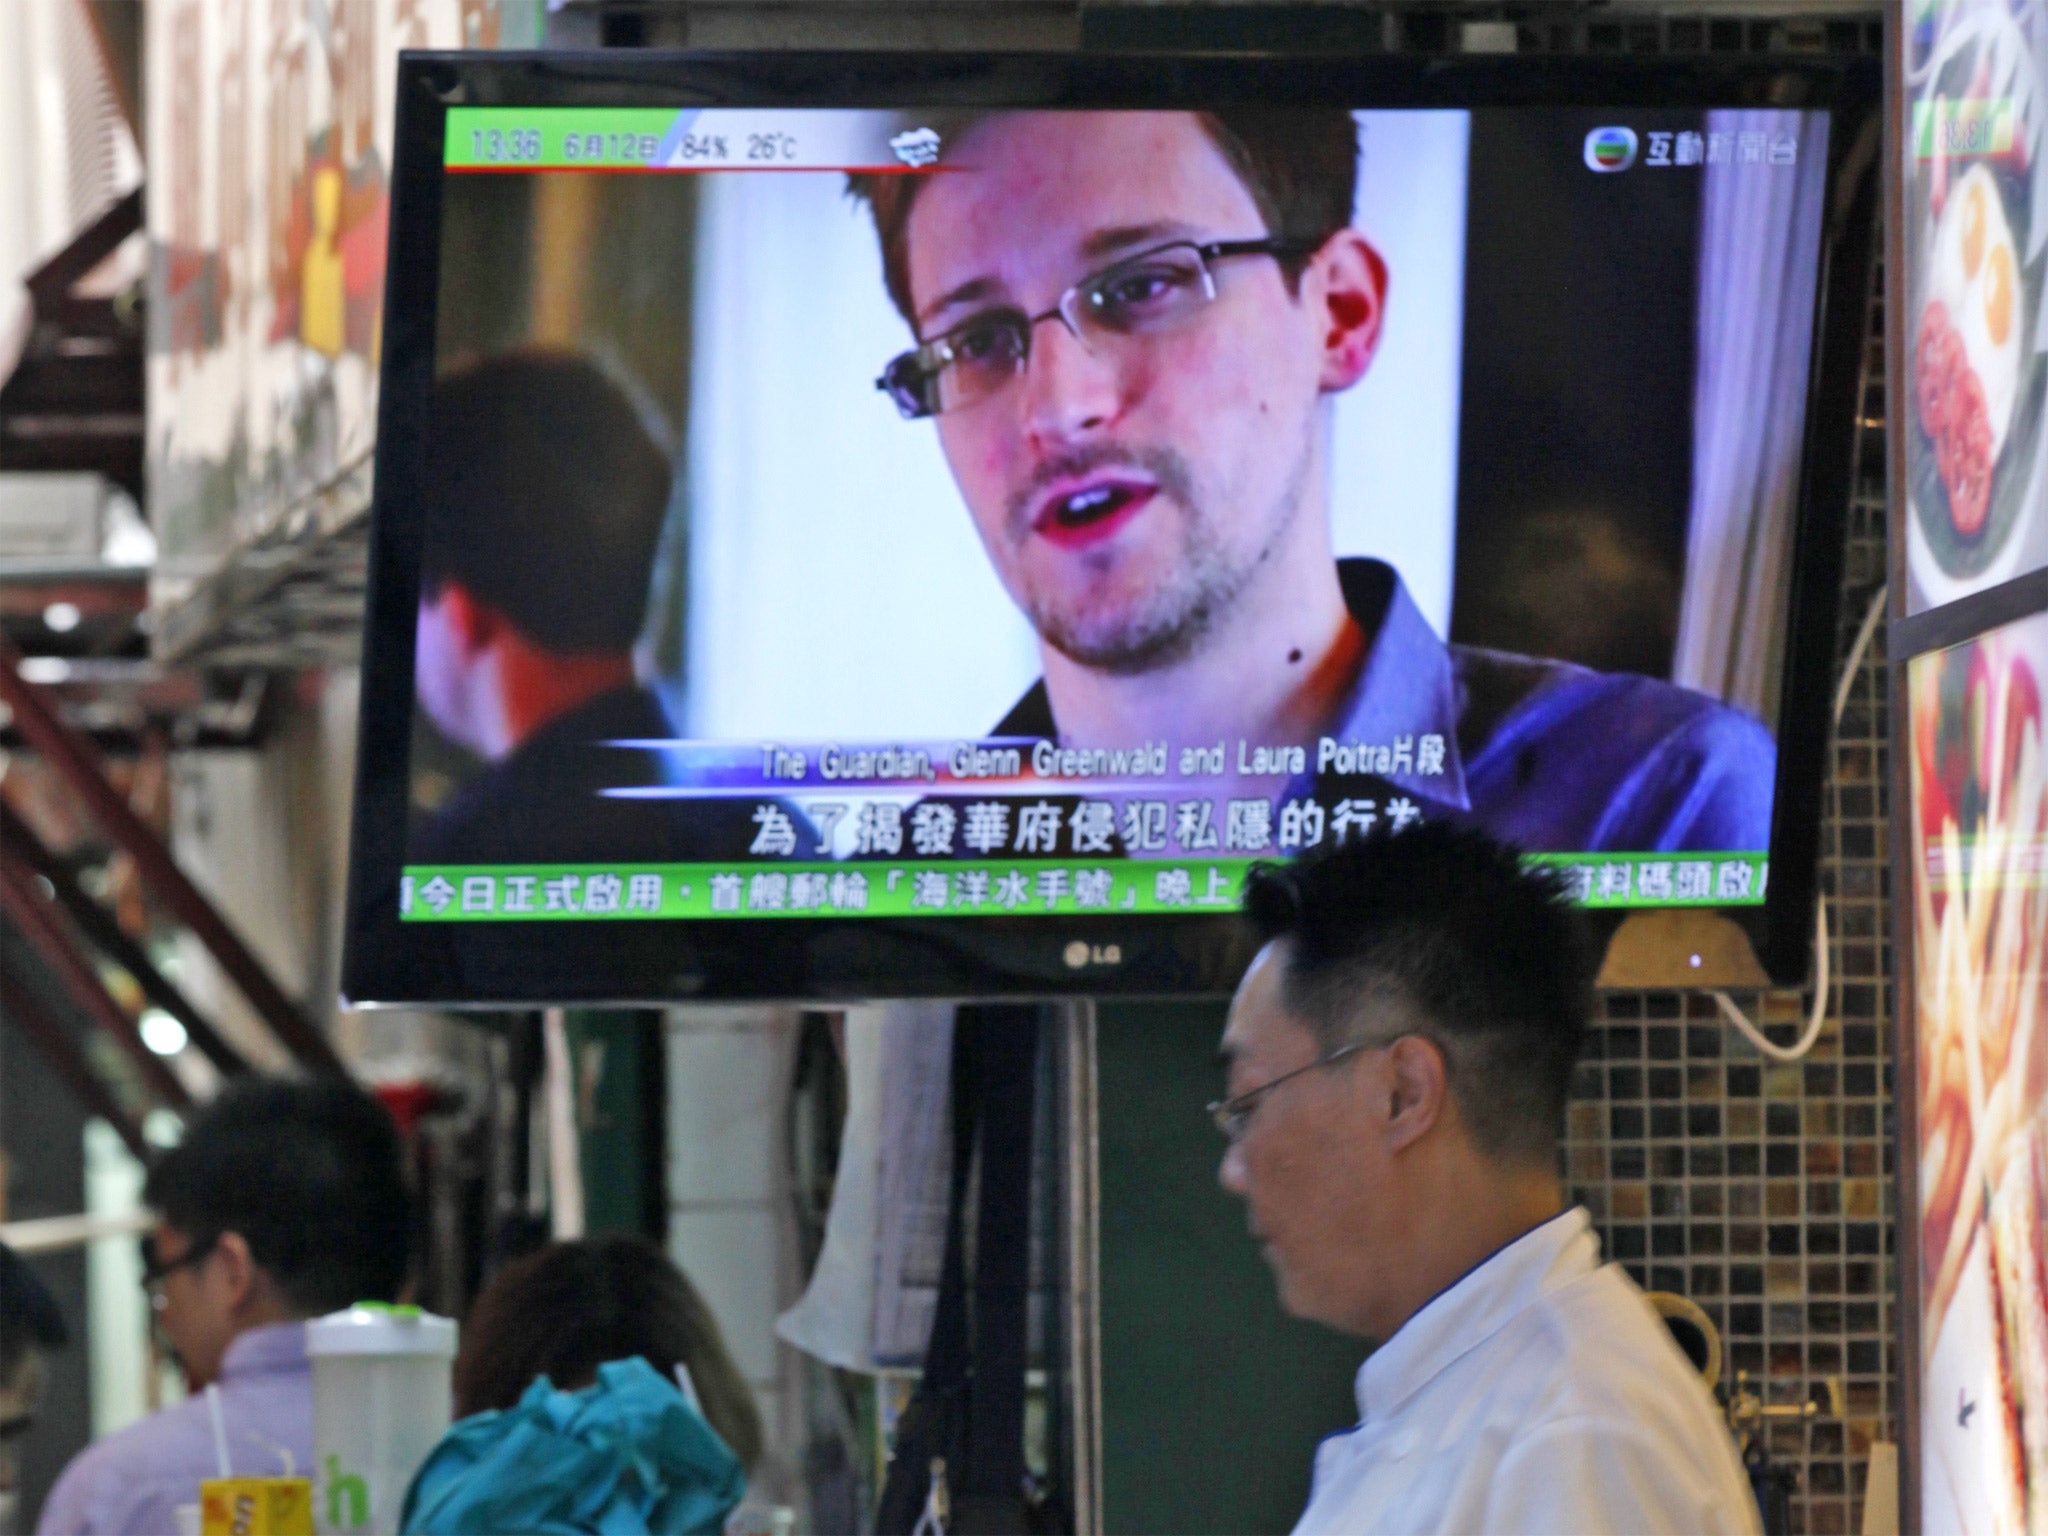 A TV screen shows Edward Snowden appearing on the news, at a restaurant in Hong Kong 